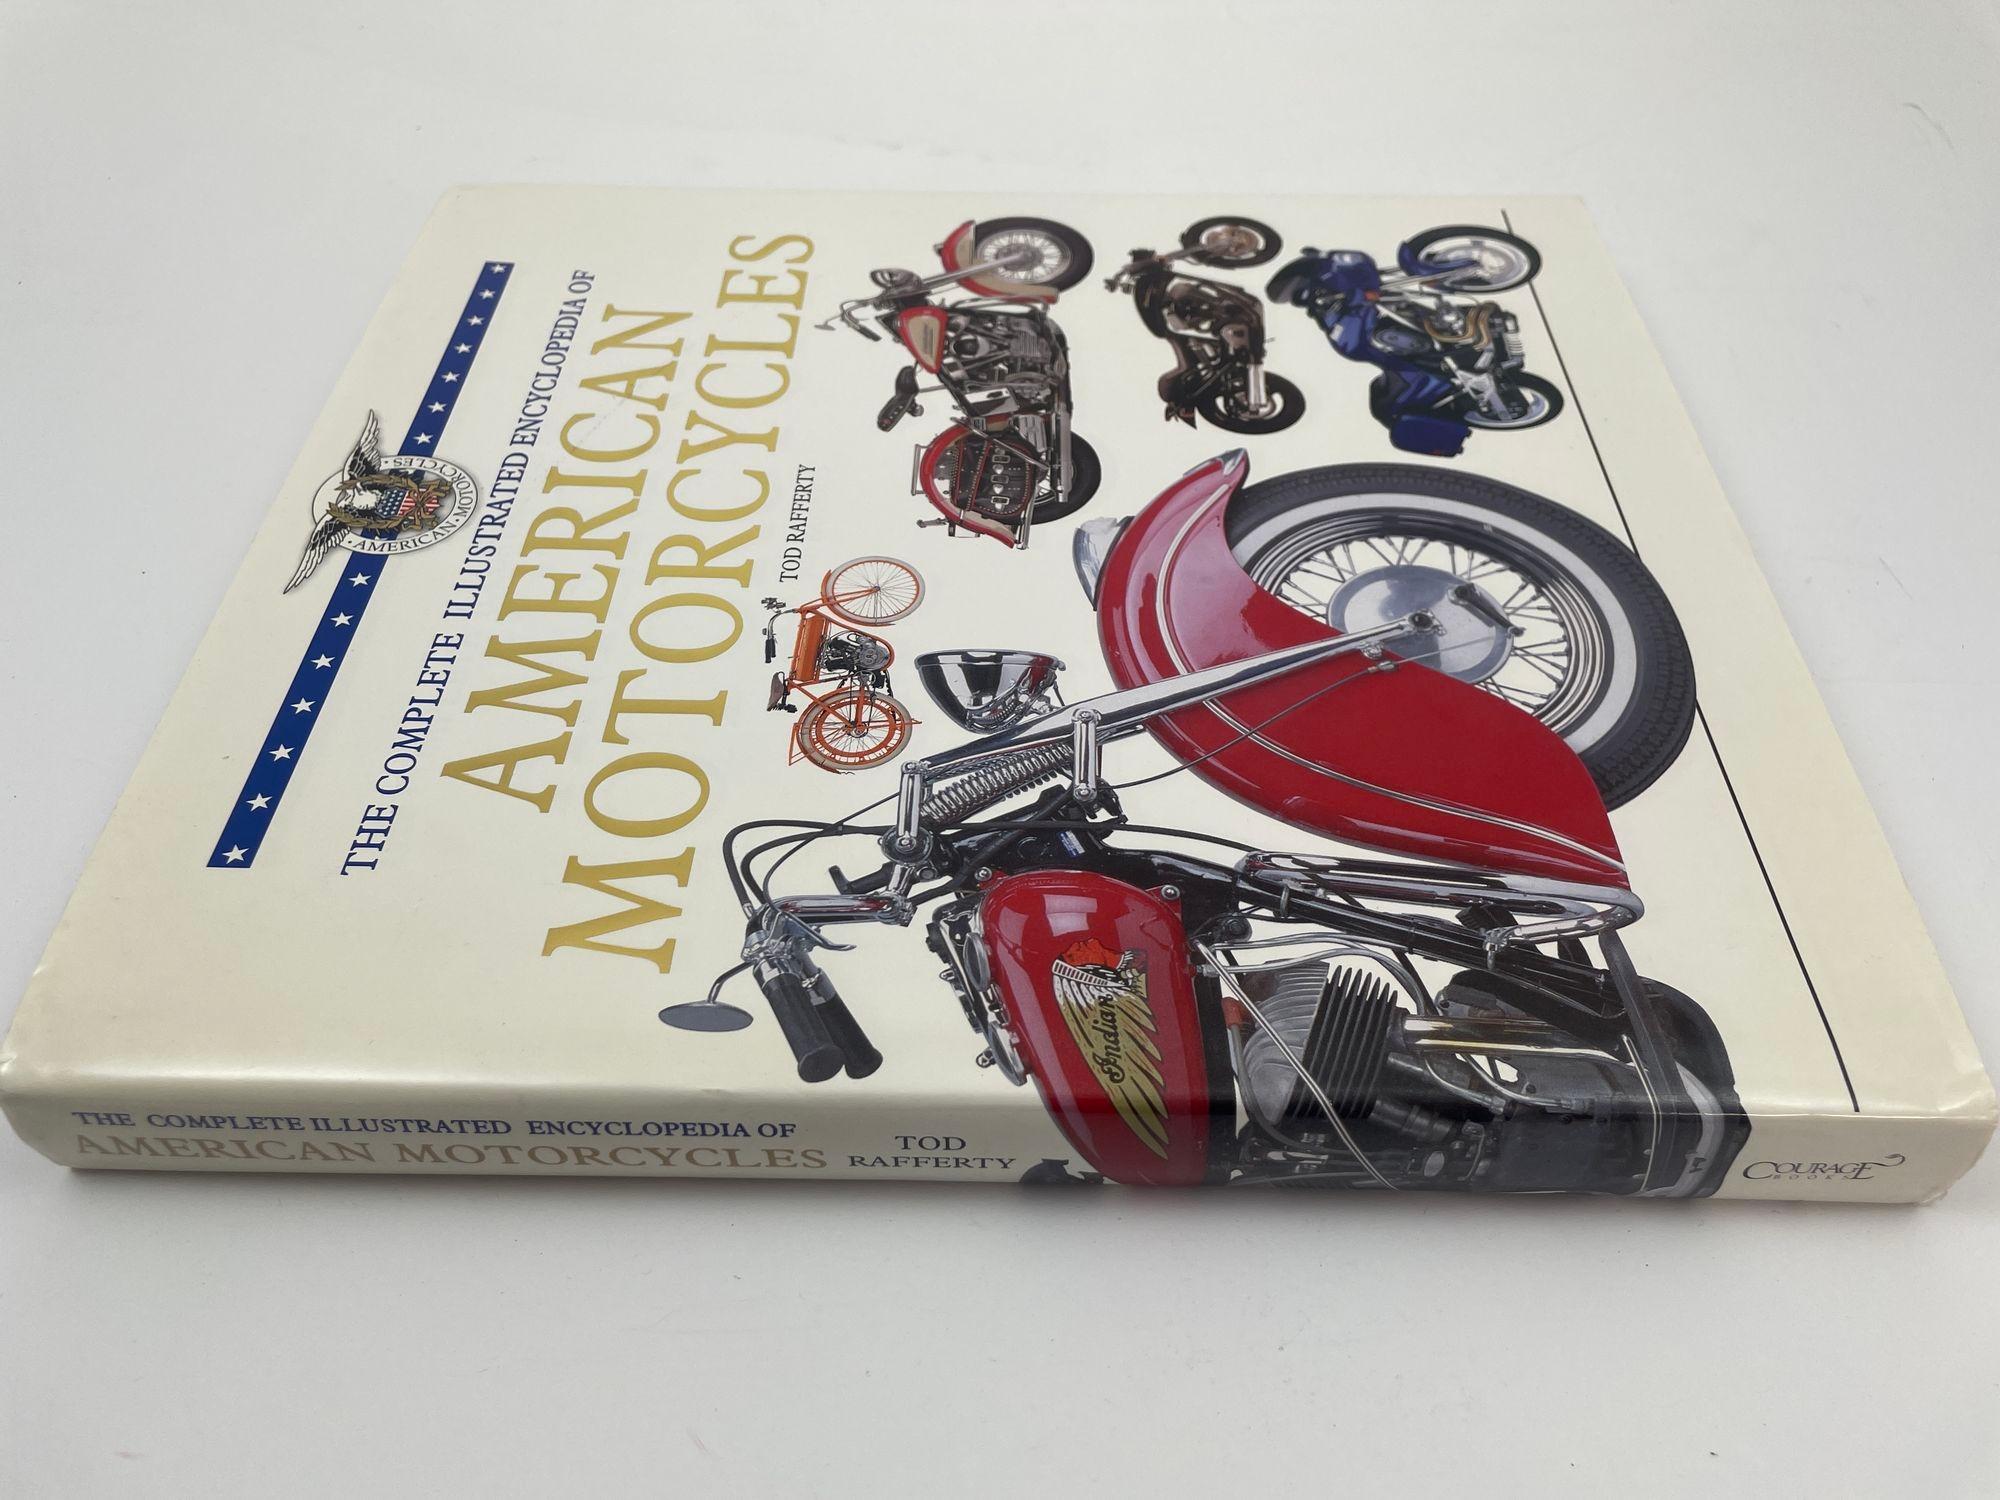 American Classical The Complete Illustrated Encyclopedia of American Motorcycles by Tod Rafferty For Sale